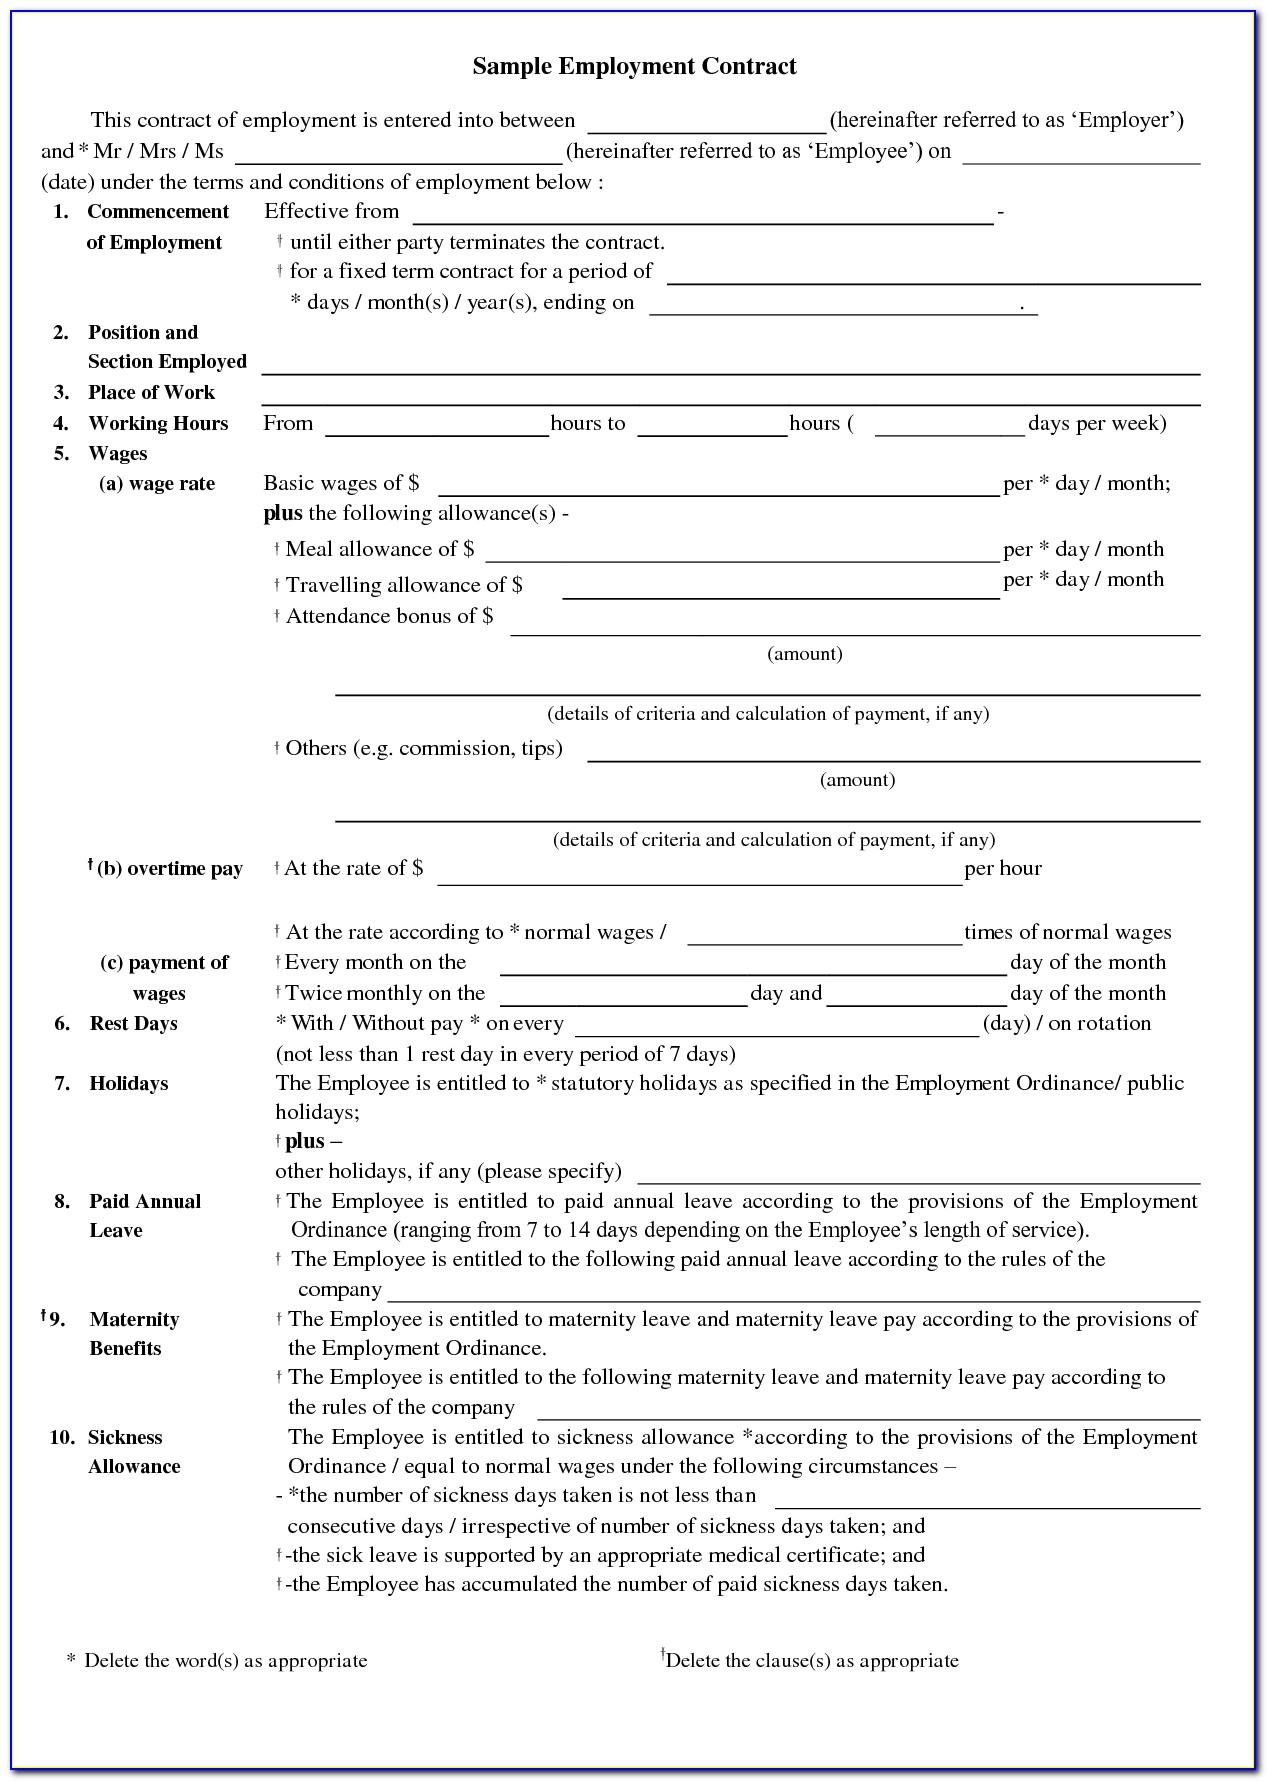 Contract Agreement Sample For Employee Malaysia